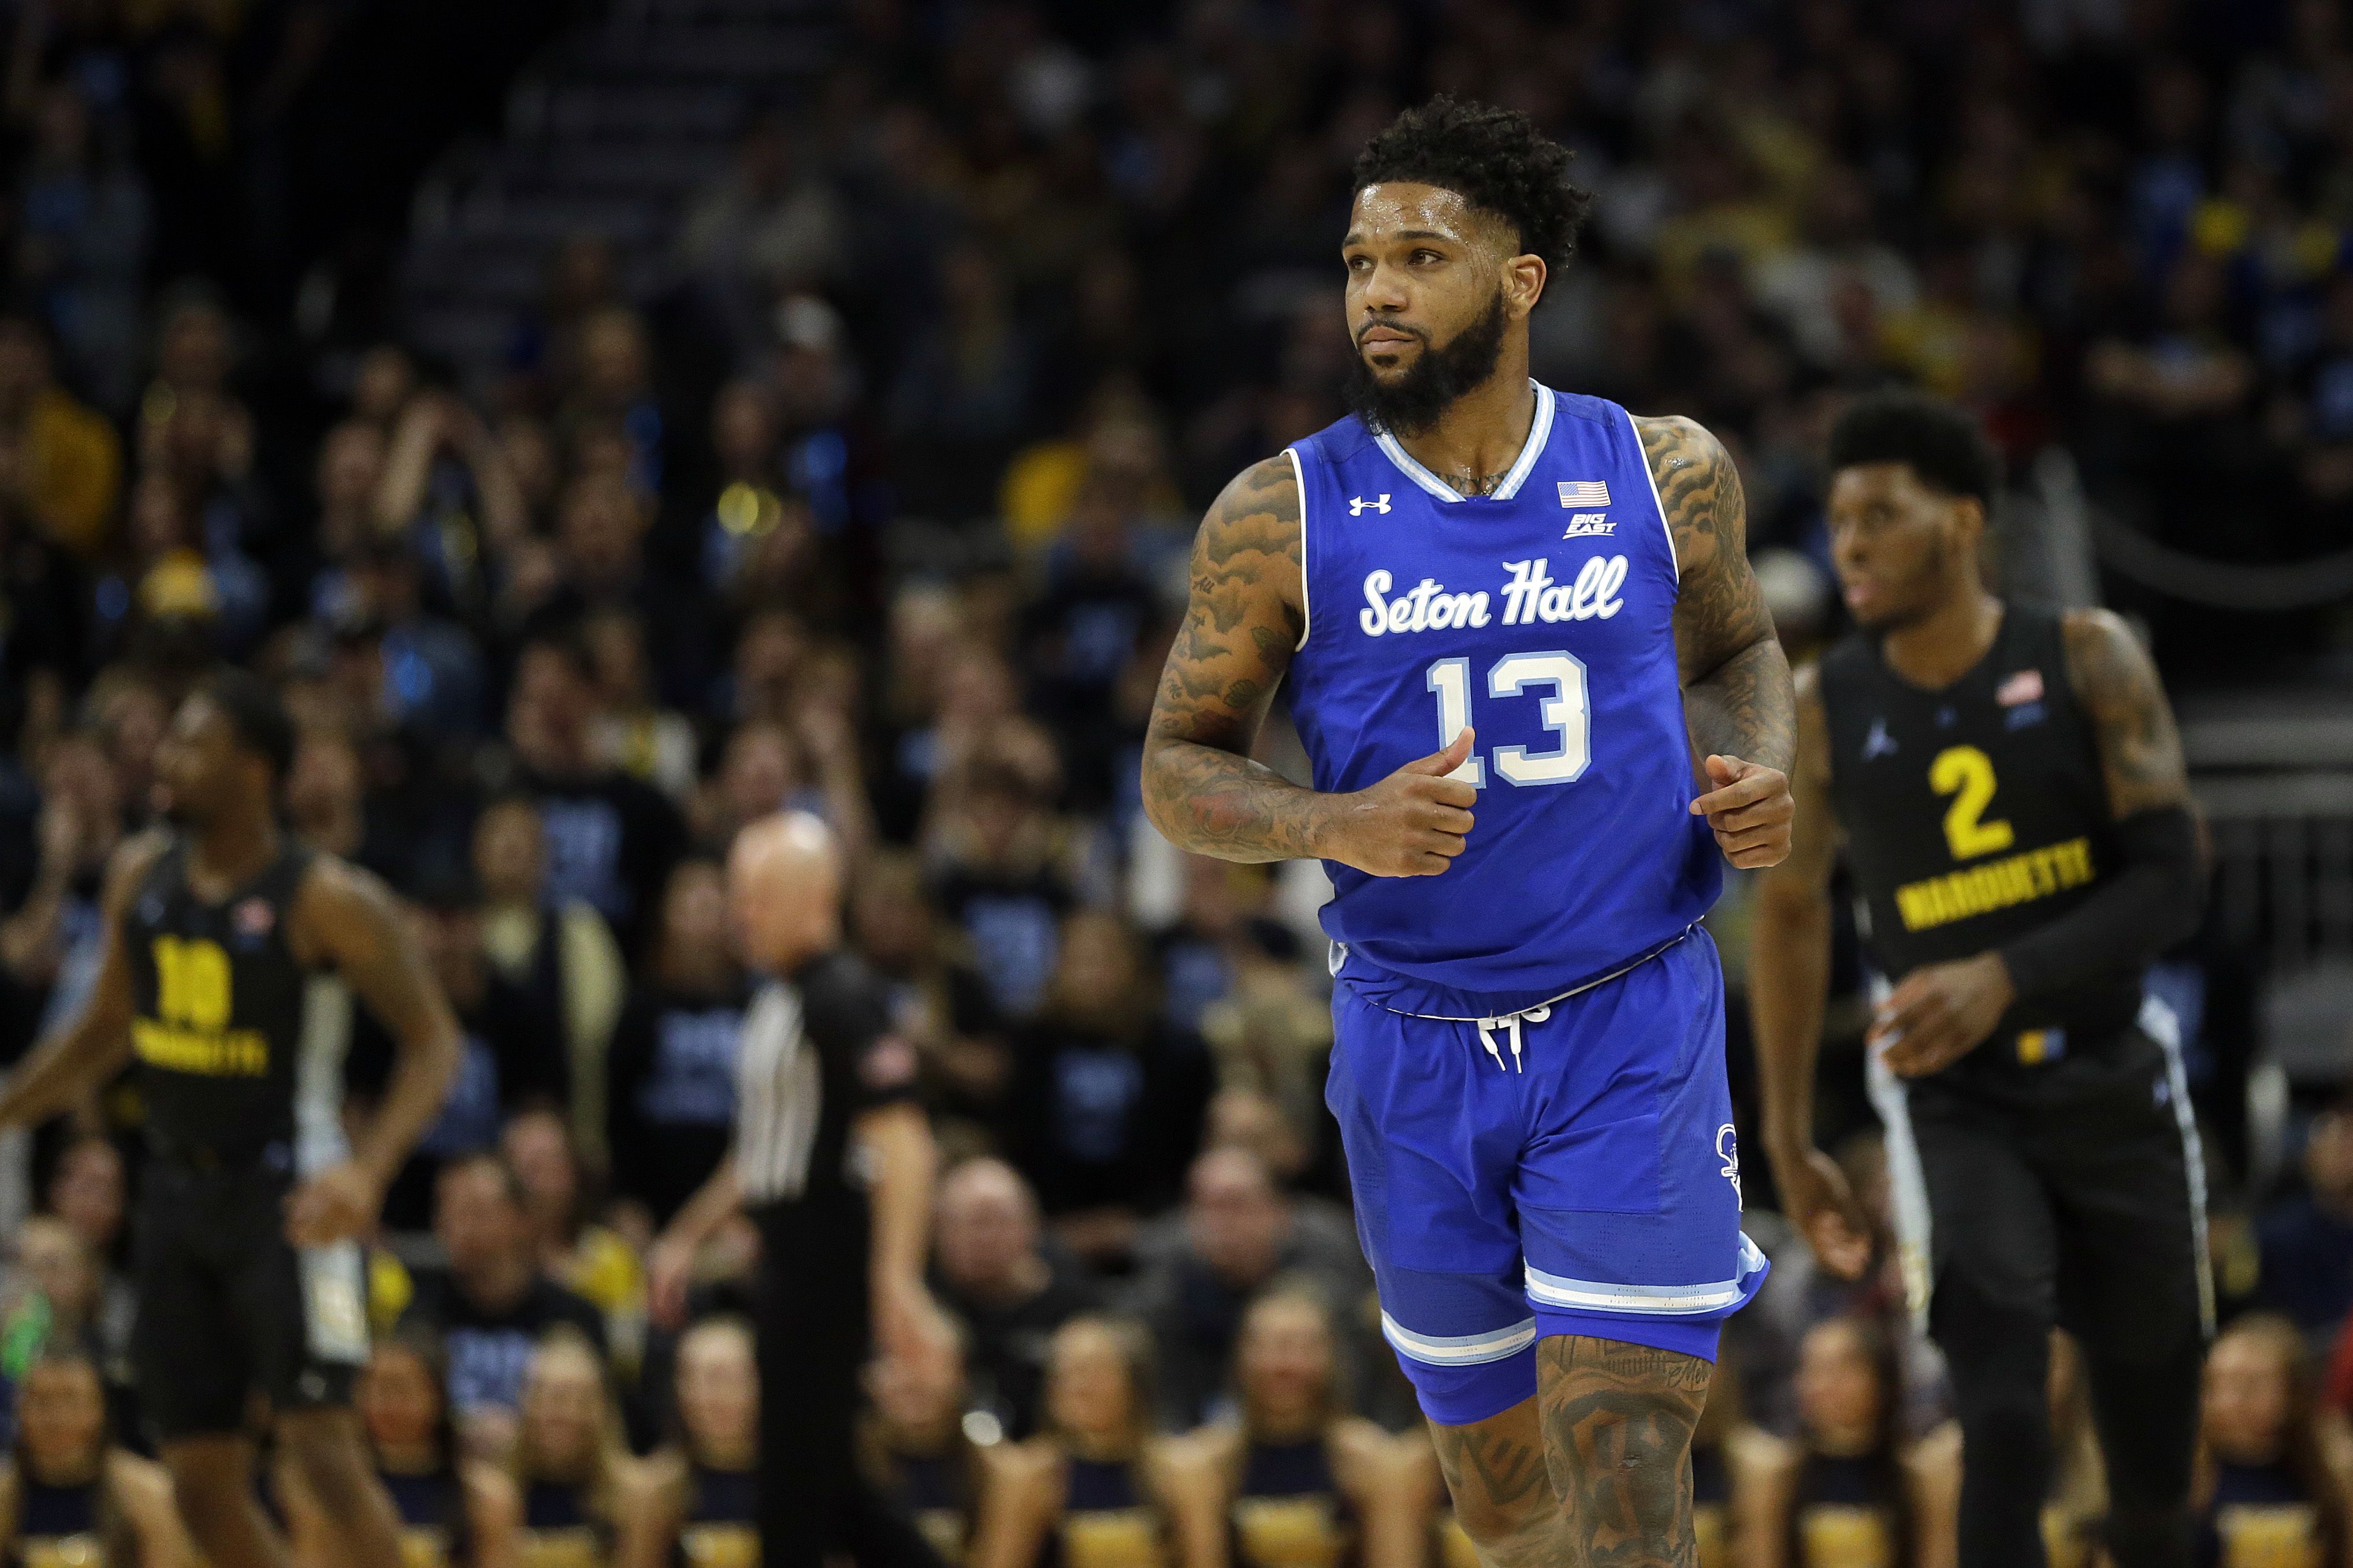 Myles Powell drops game-high 34 points as No. 12 Seton Hall defeats  Georgetown